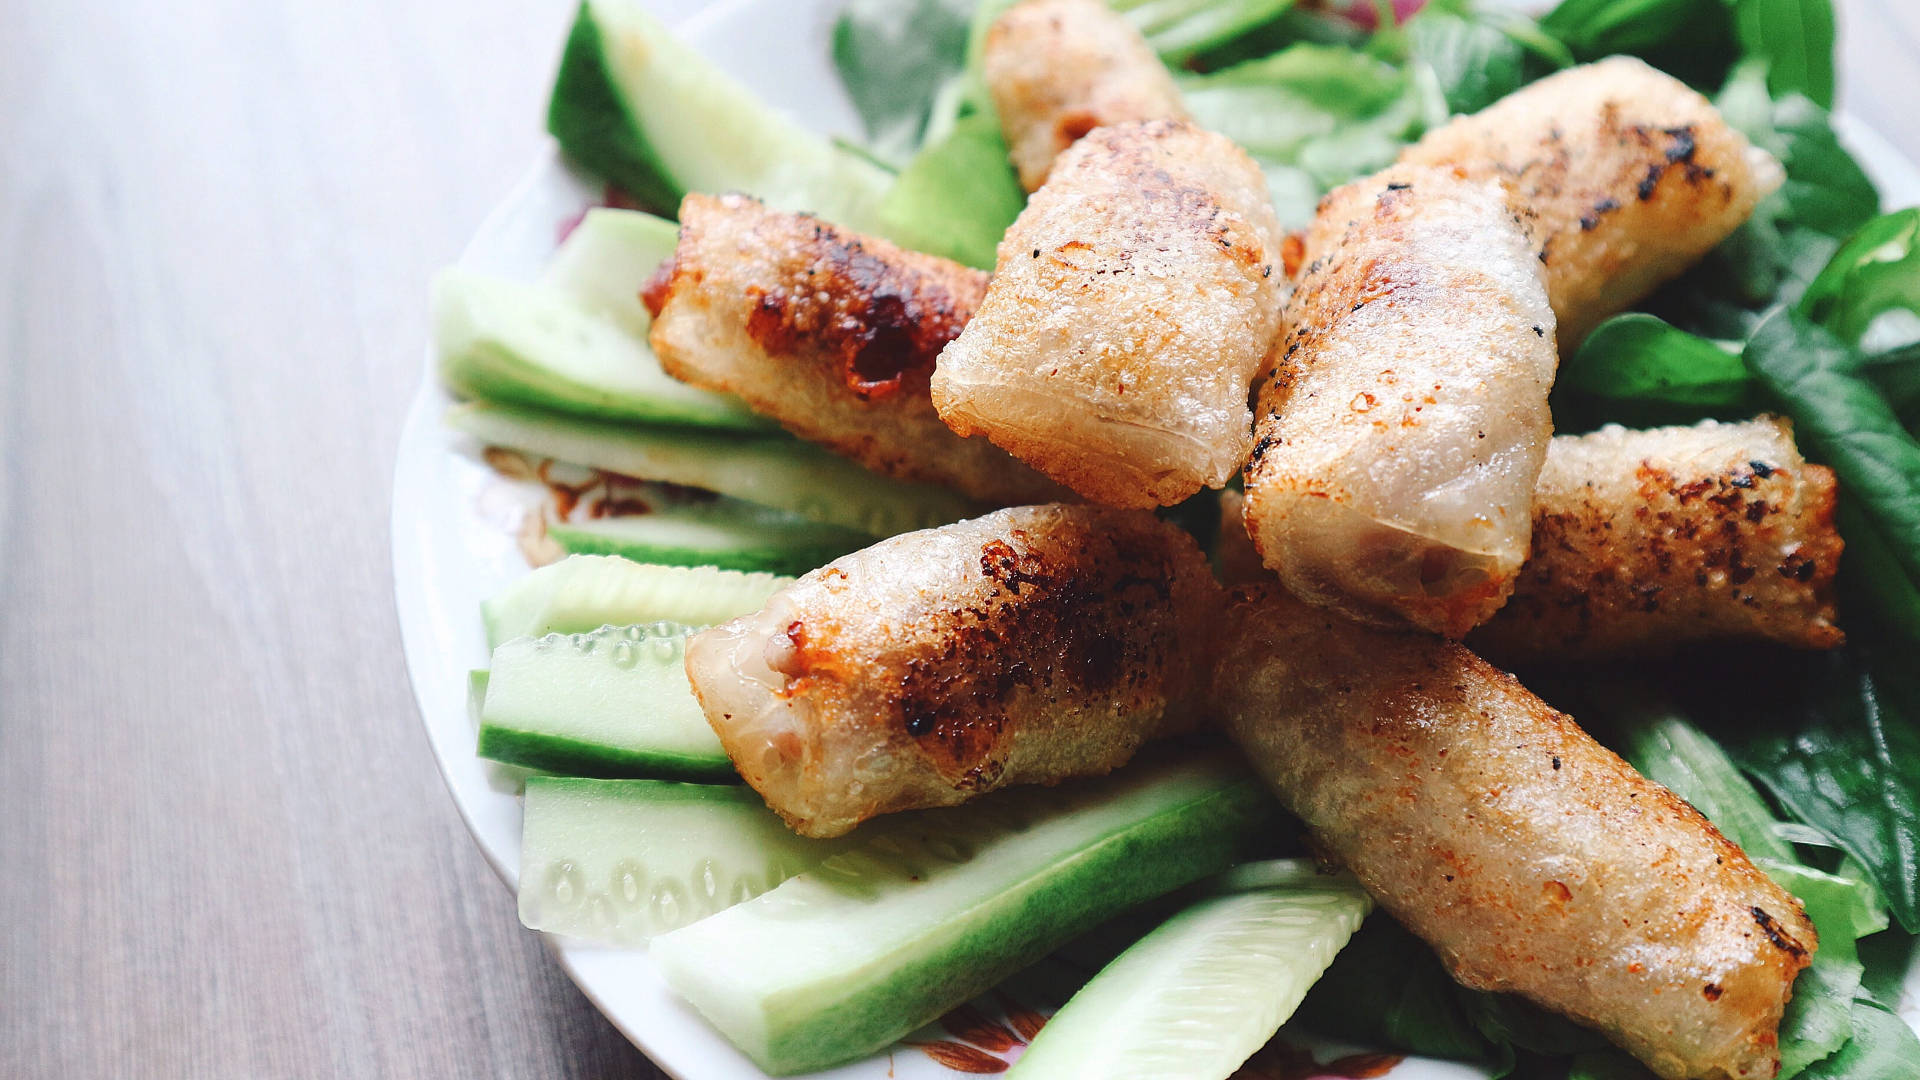 Stack Of Egg Rolls On Sliced Cucumbers